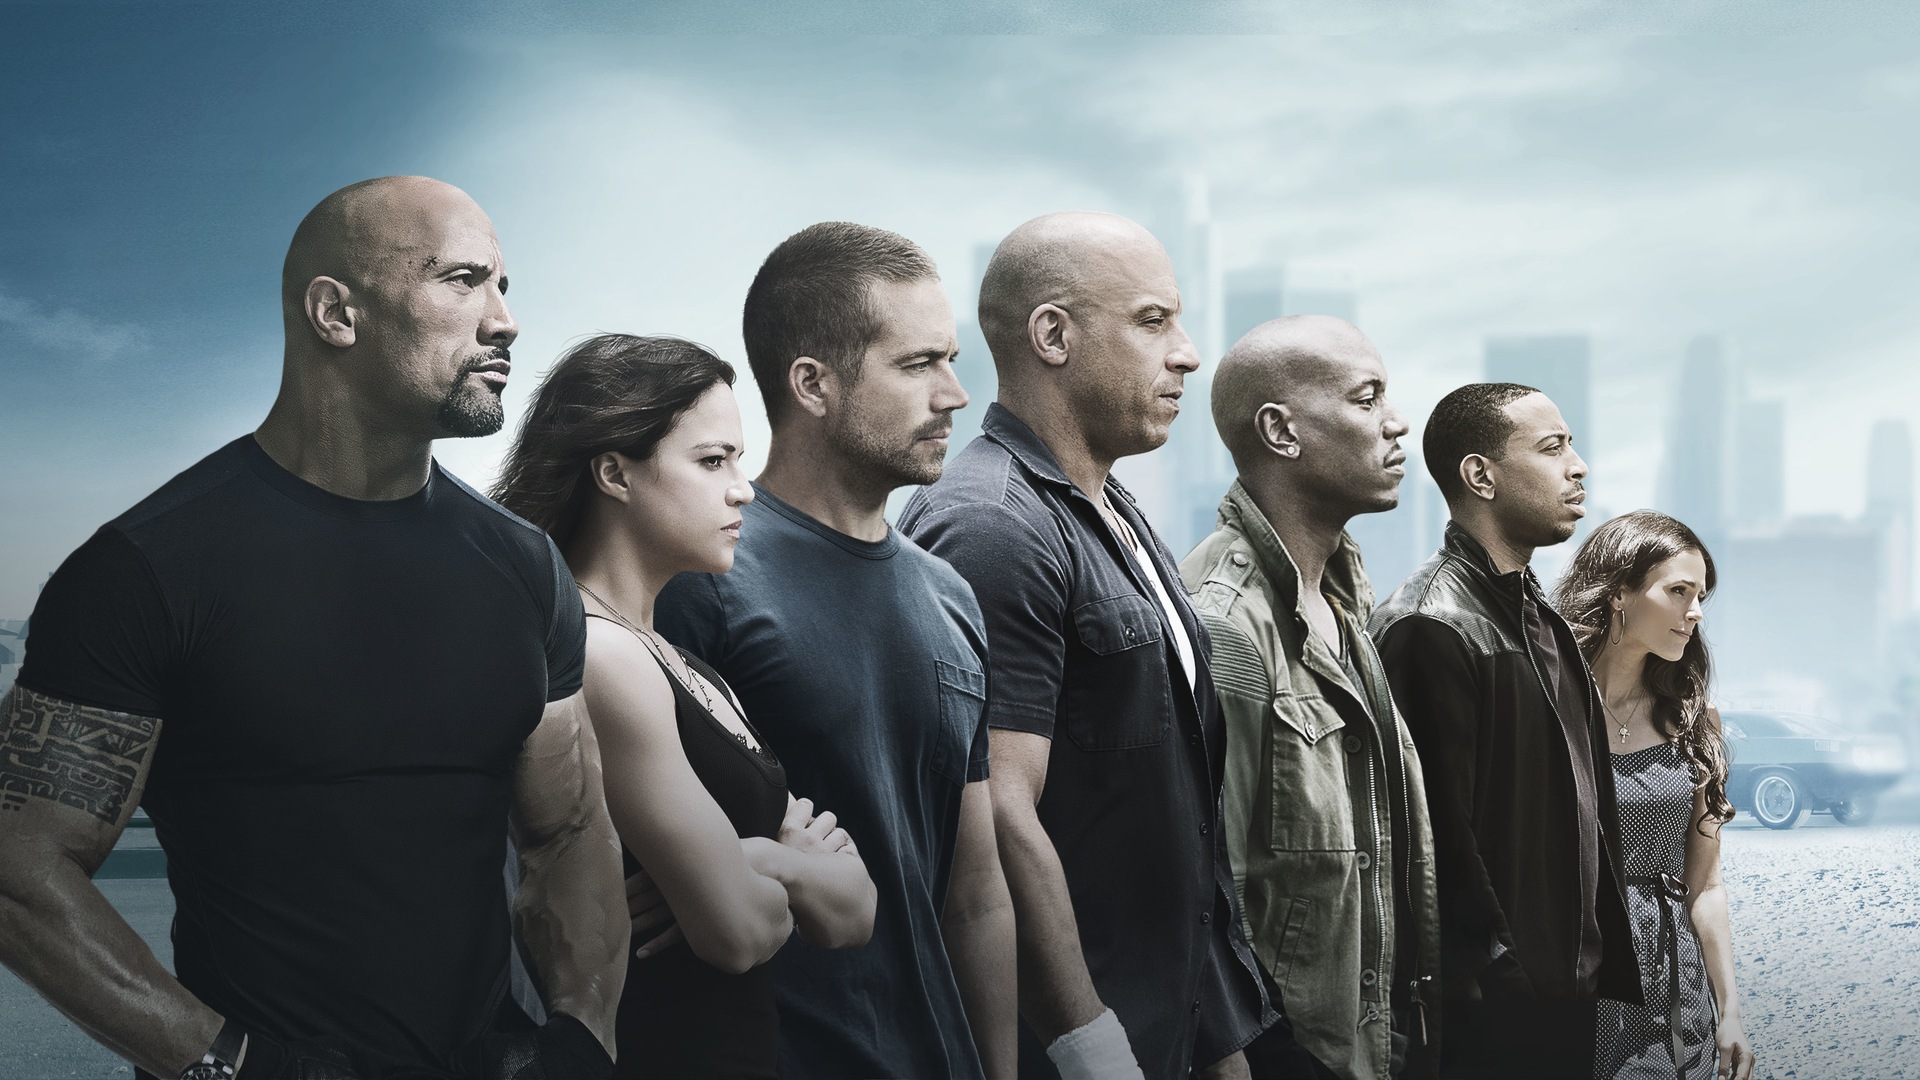 Fast and Furious 7 HD movie wallpapers #1 - 1920x1080